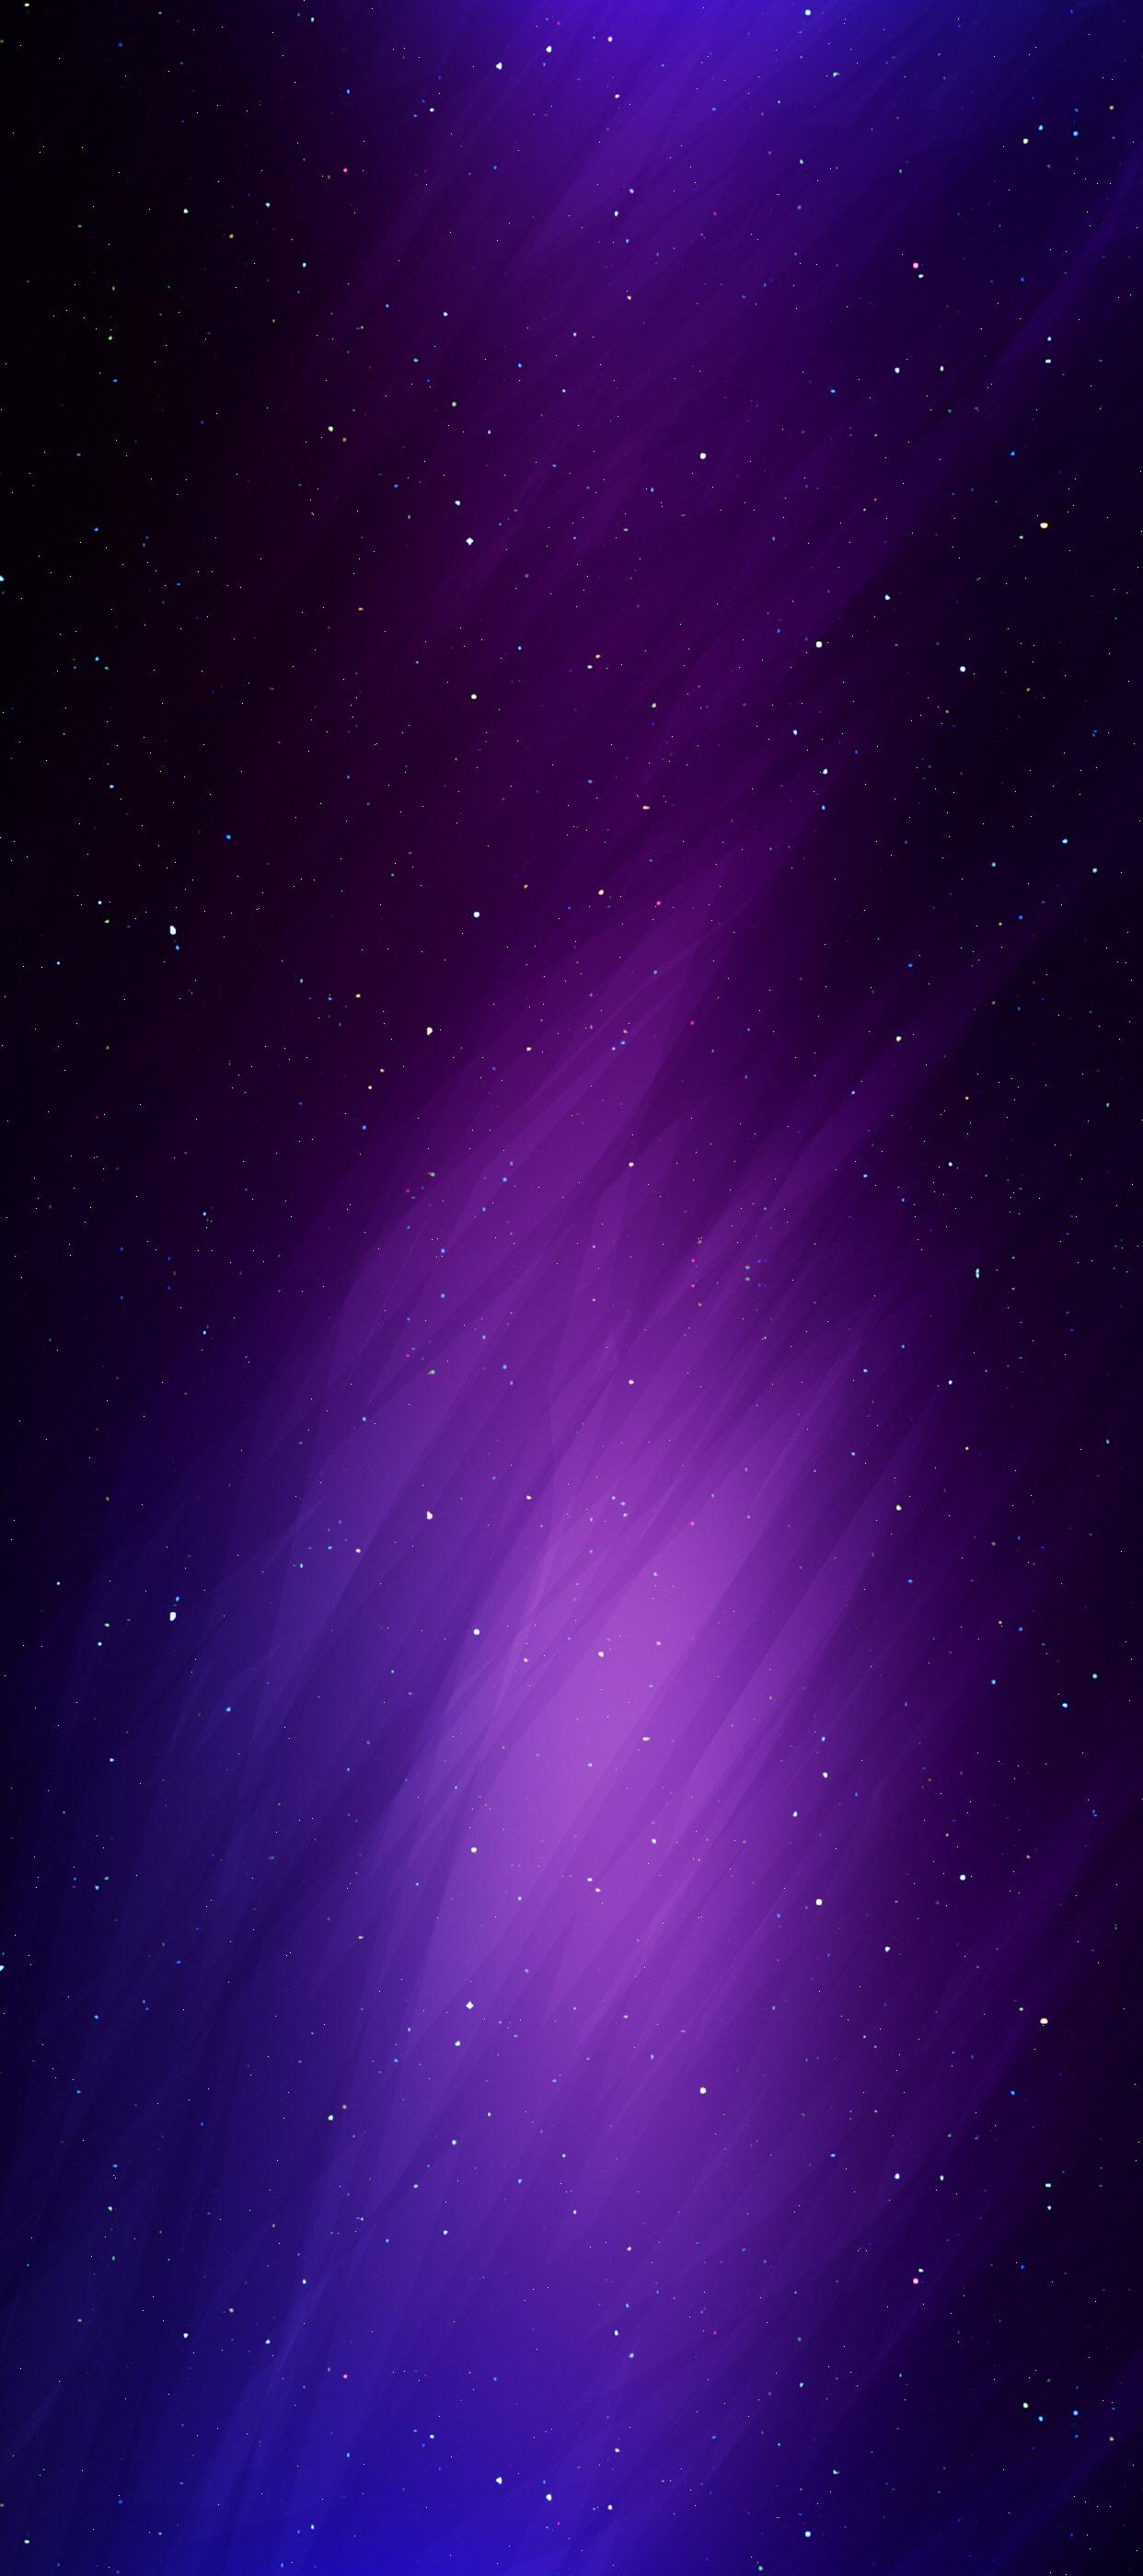 1242x2800 Purple Space I Found It On Twitter Ill Update Soon With The Source Iphone X Wallpaper Iphone X Wallpaper Hd